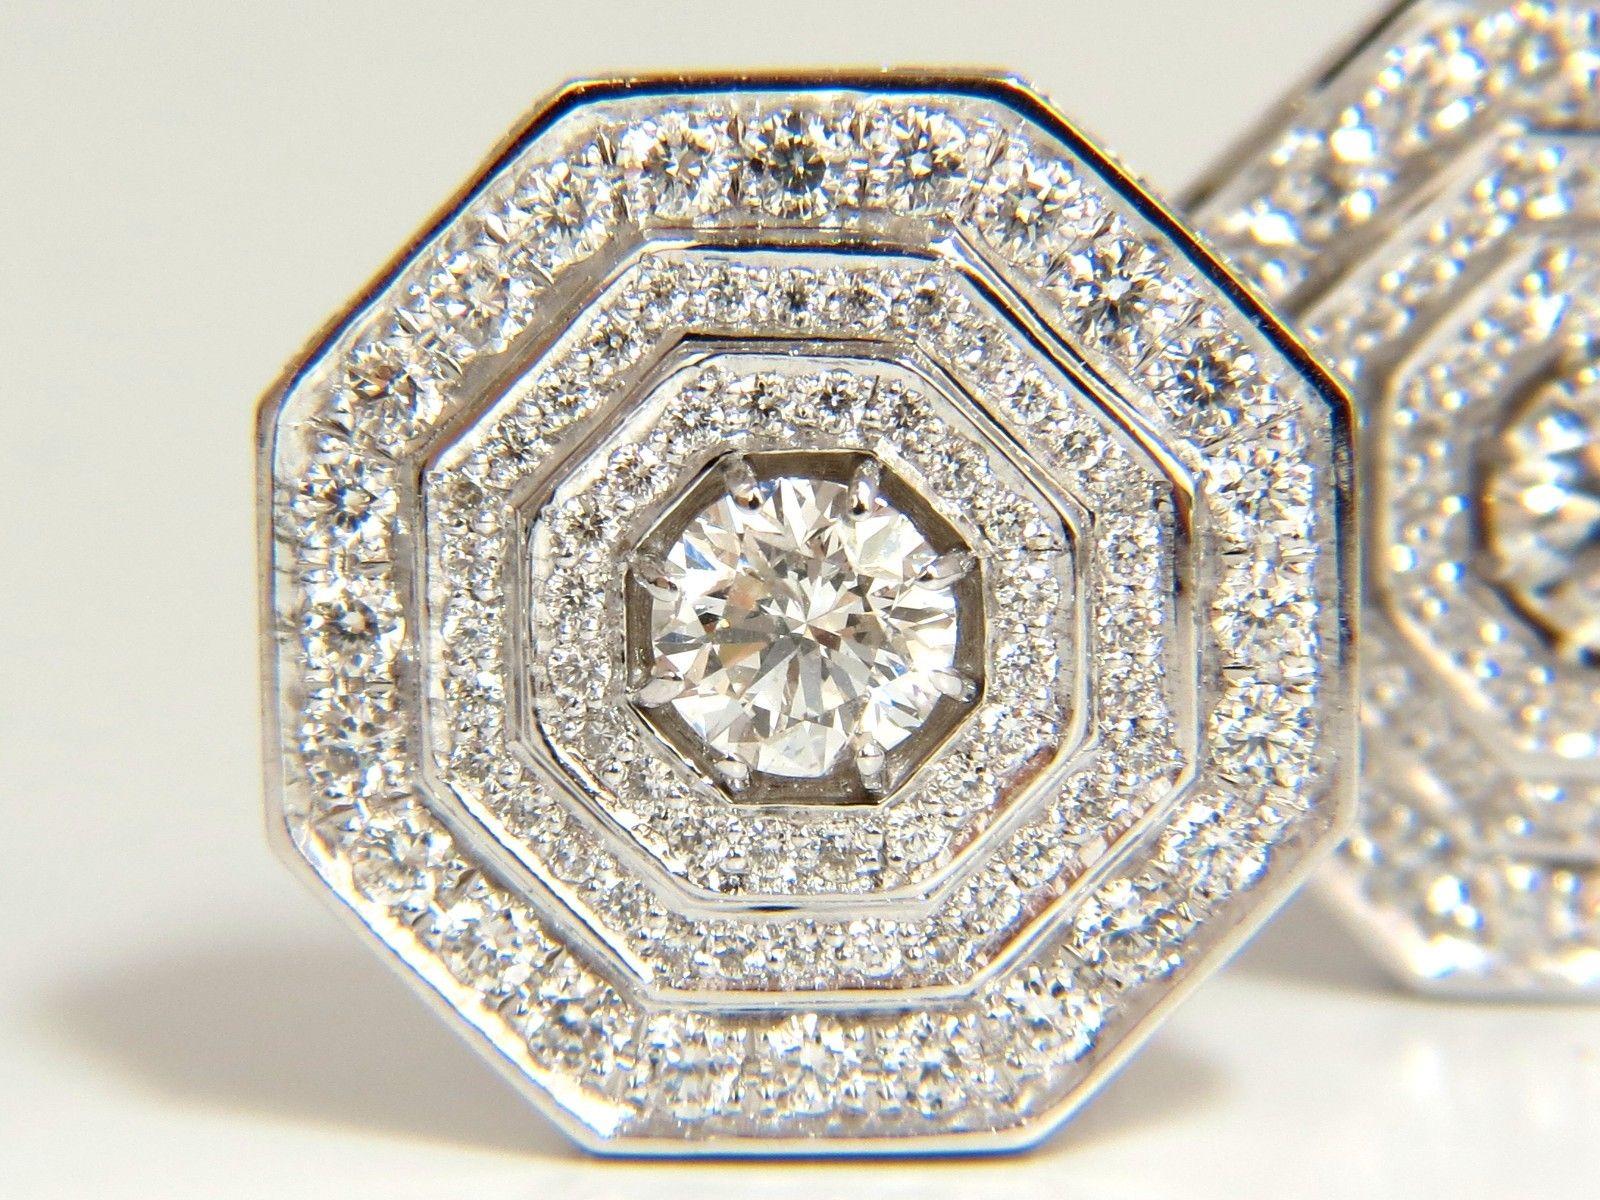 Bead set / Architectural Mod Deco / Octagonal Raised Step /  Omega Clip Earrings

4.00ct. Full cut Rounds, brilliant natural diamonds

Sifted from the finest diamond parcels.

Vs-2  clarity

F / G -colors.

18kt. white gold. 

Diameter: .71